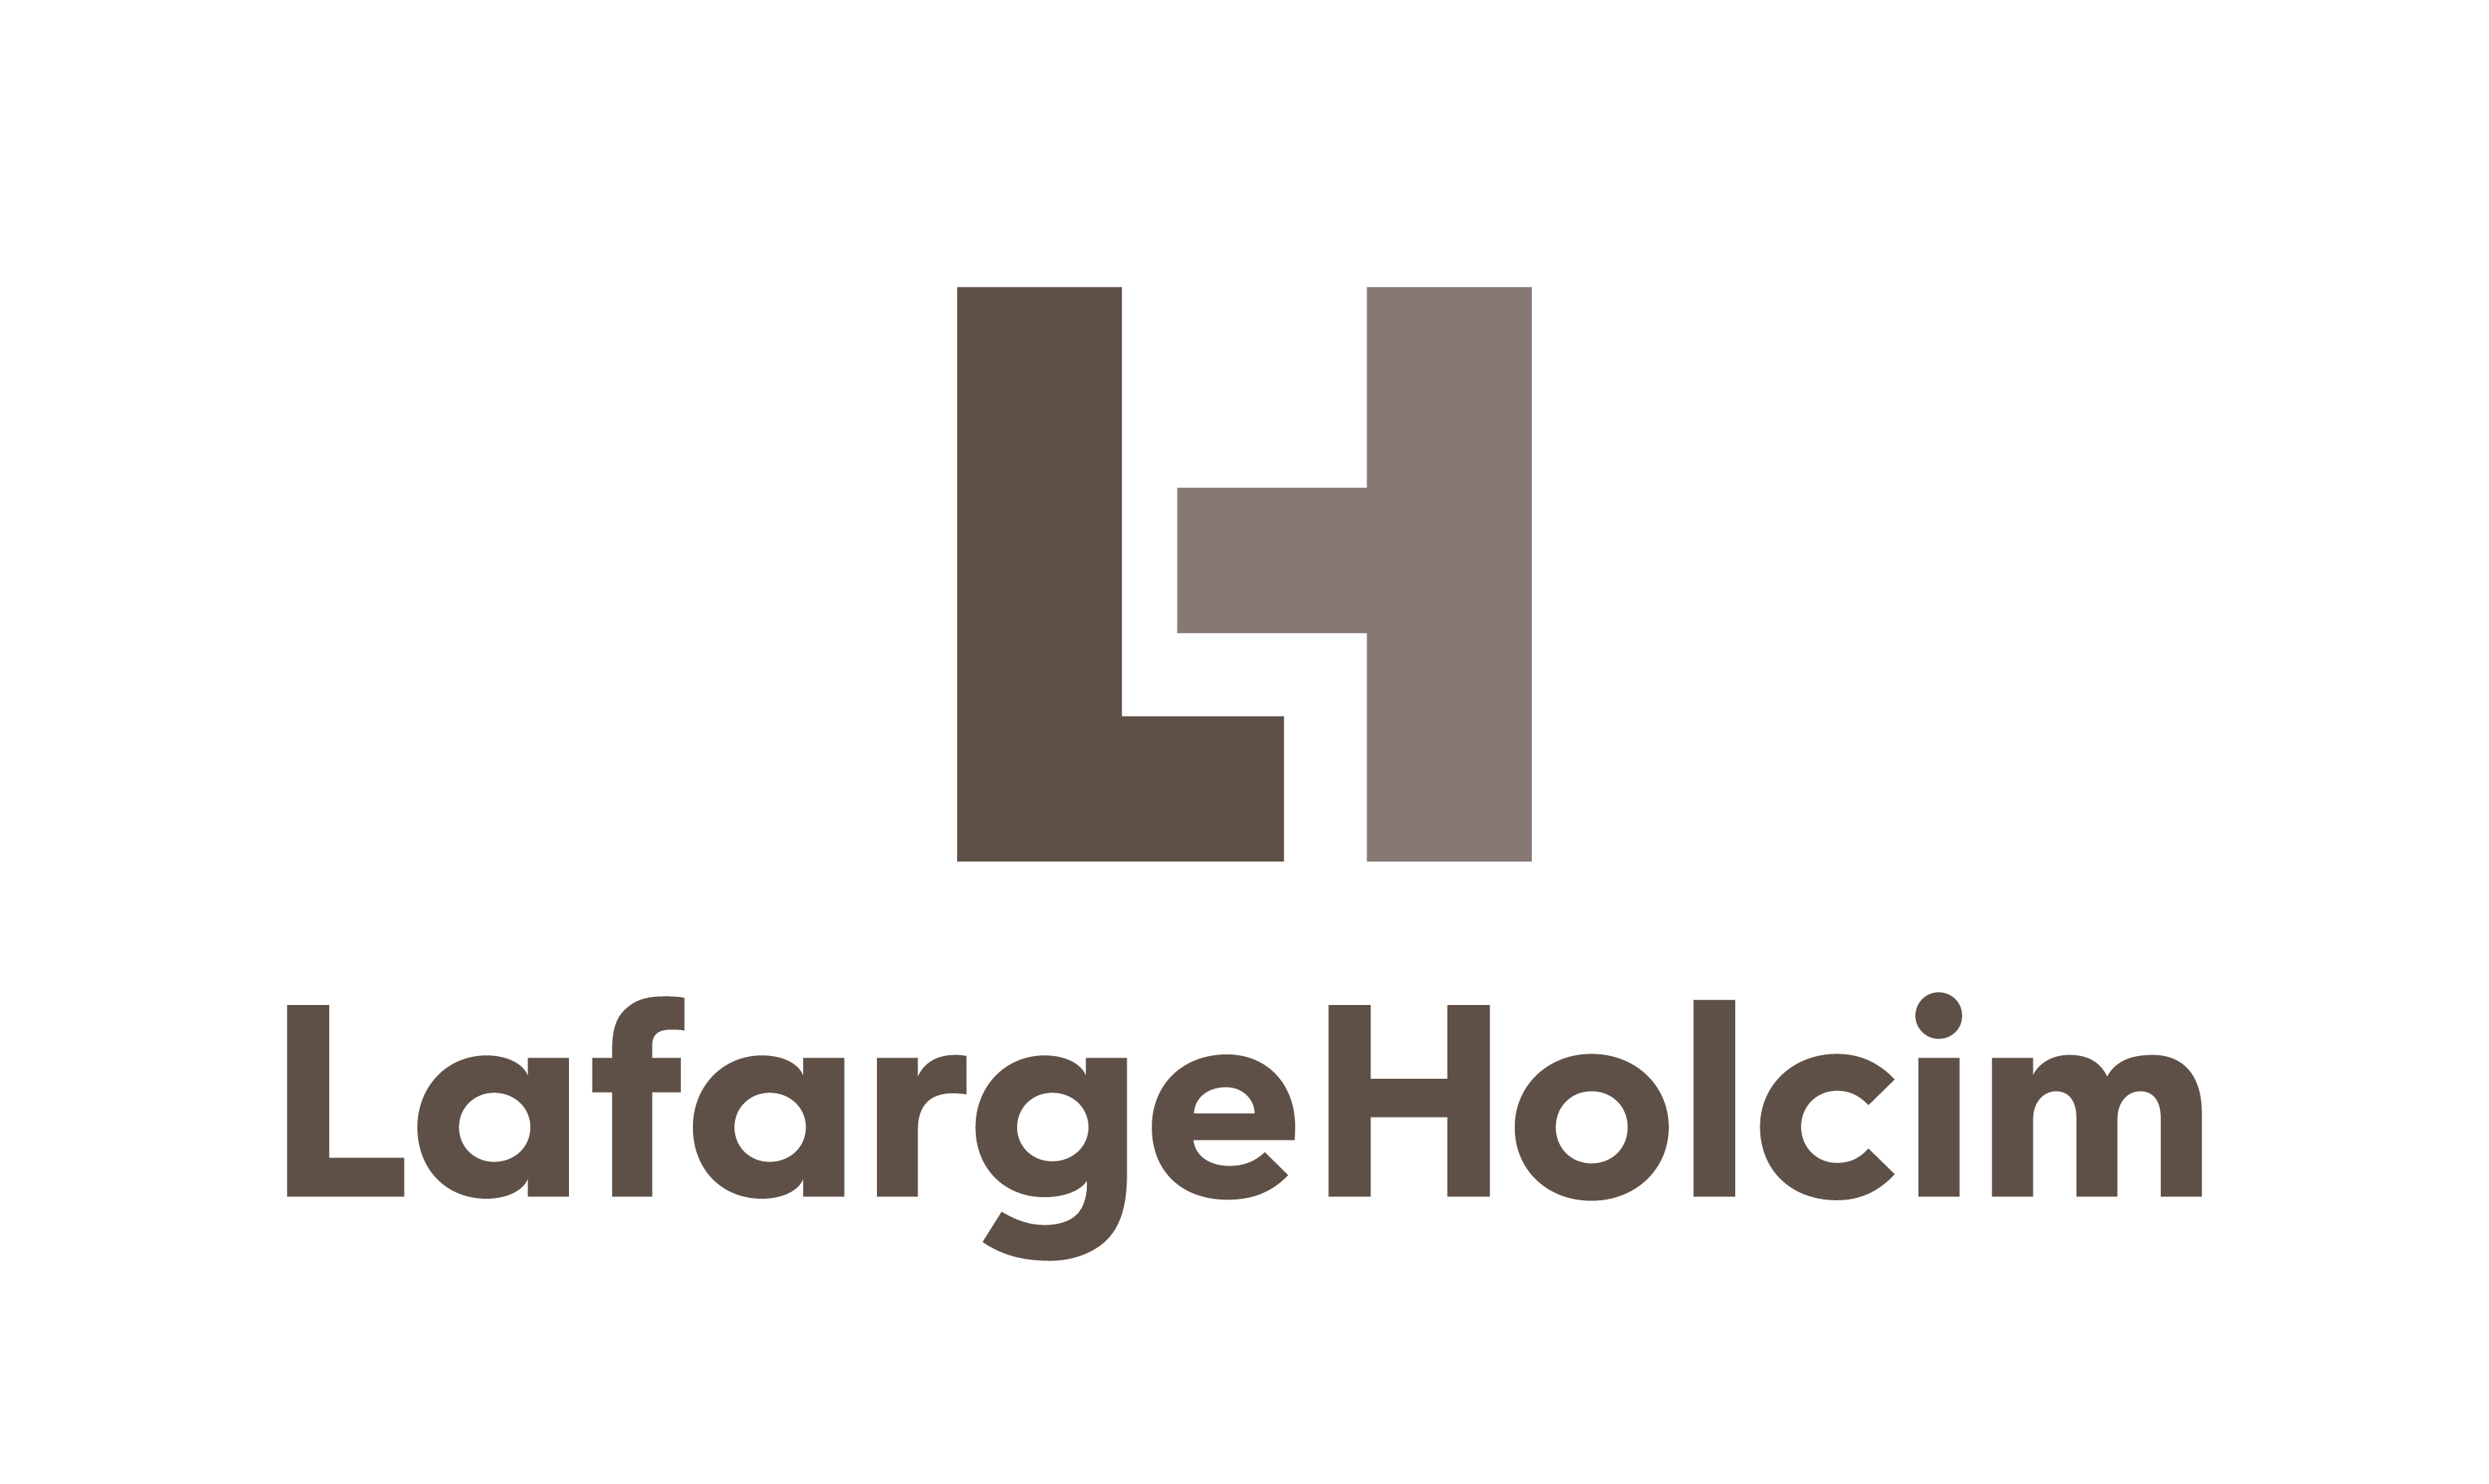  The latest purchases add to eight similar bolt-on acquisitions by LafargeHolcim in 2020